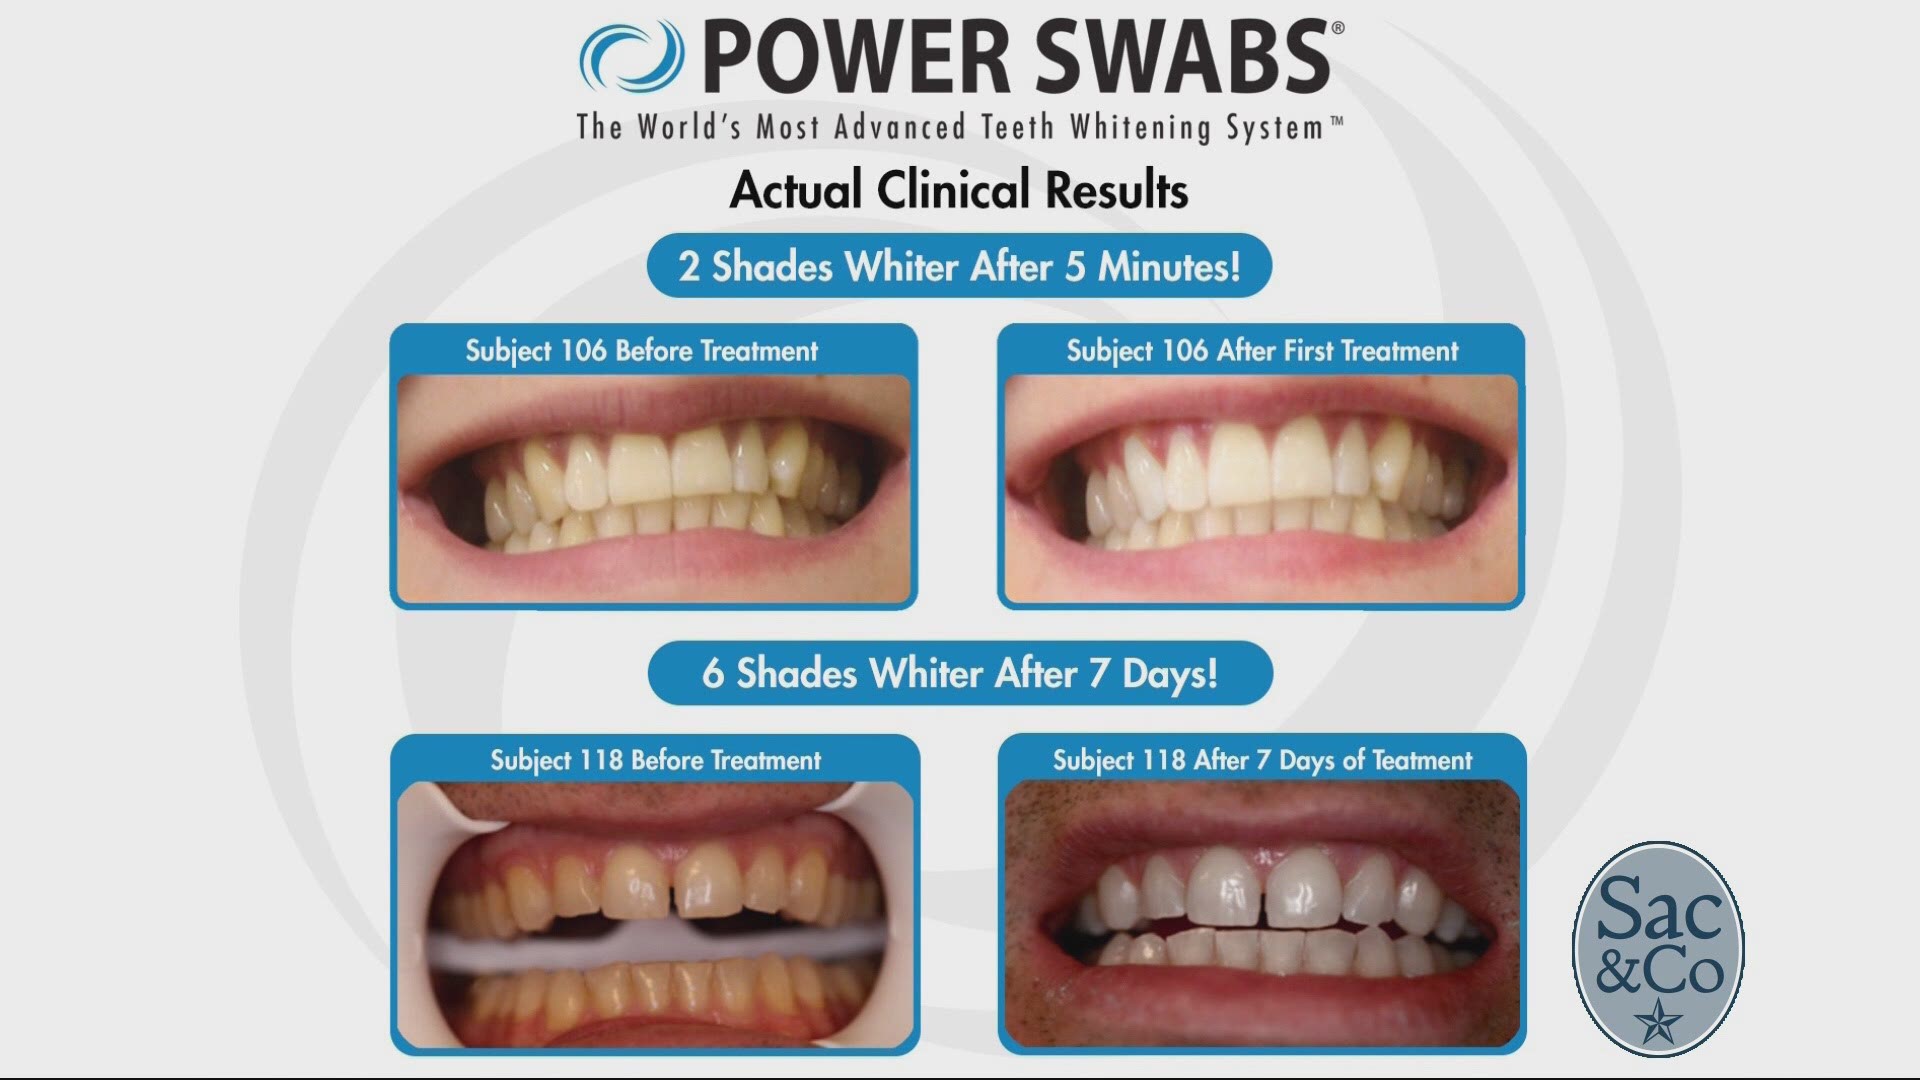 Learn how Power Swabs could possibly give you whiter teeth in just five minutes with minimal to no sensitivity! The following is a paid segment sponsored by True Earth Health Solutions.